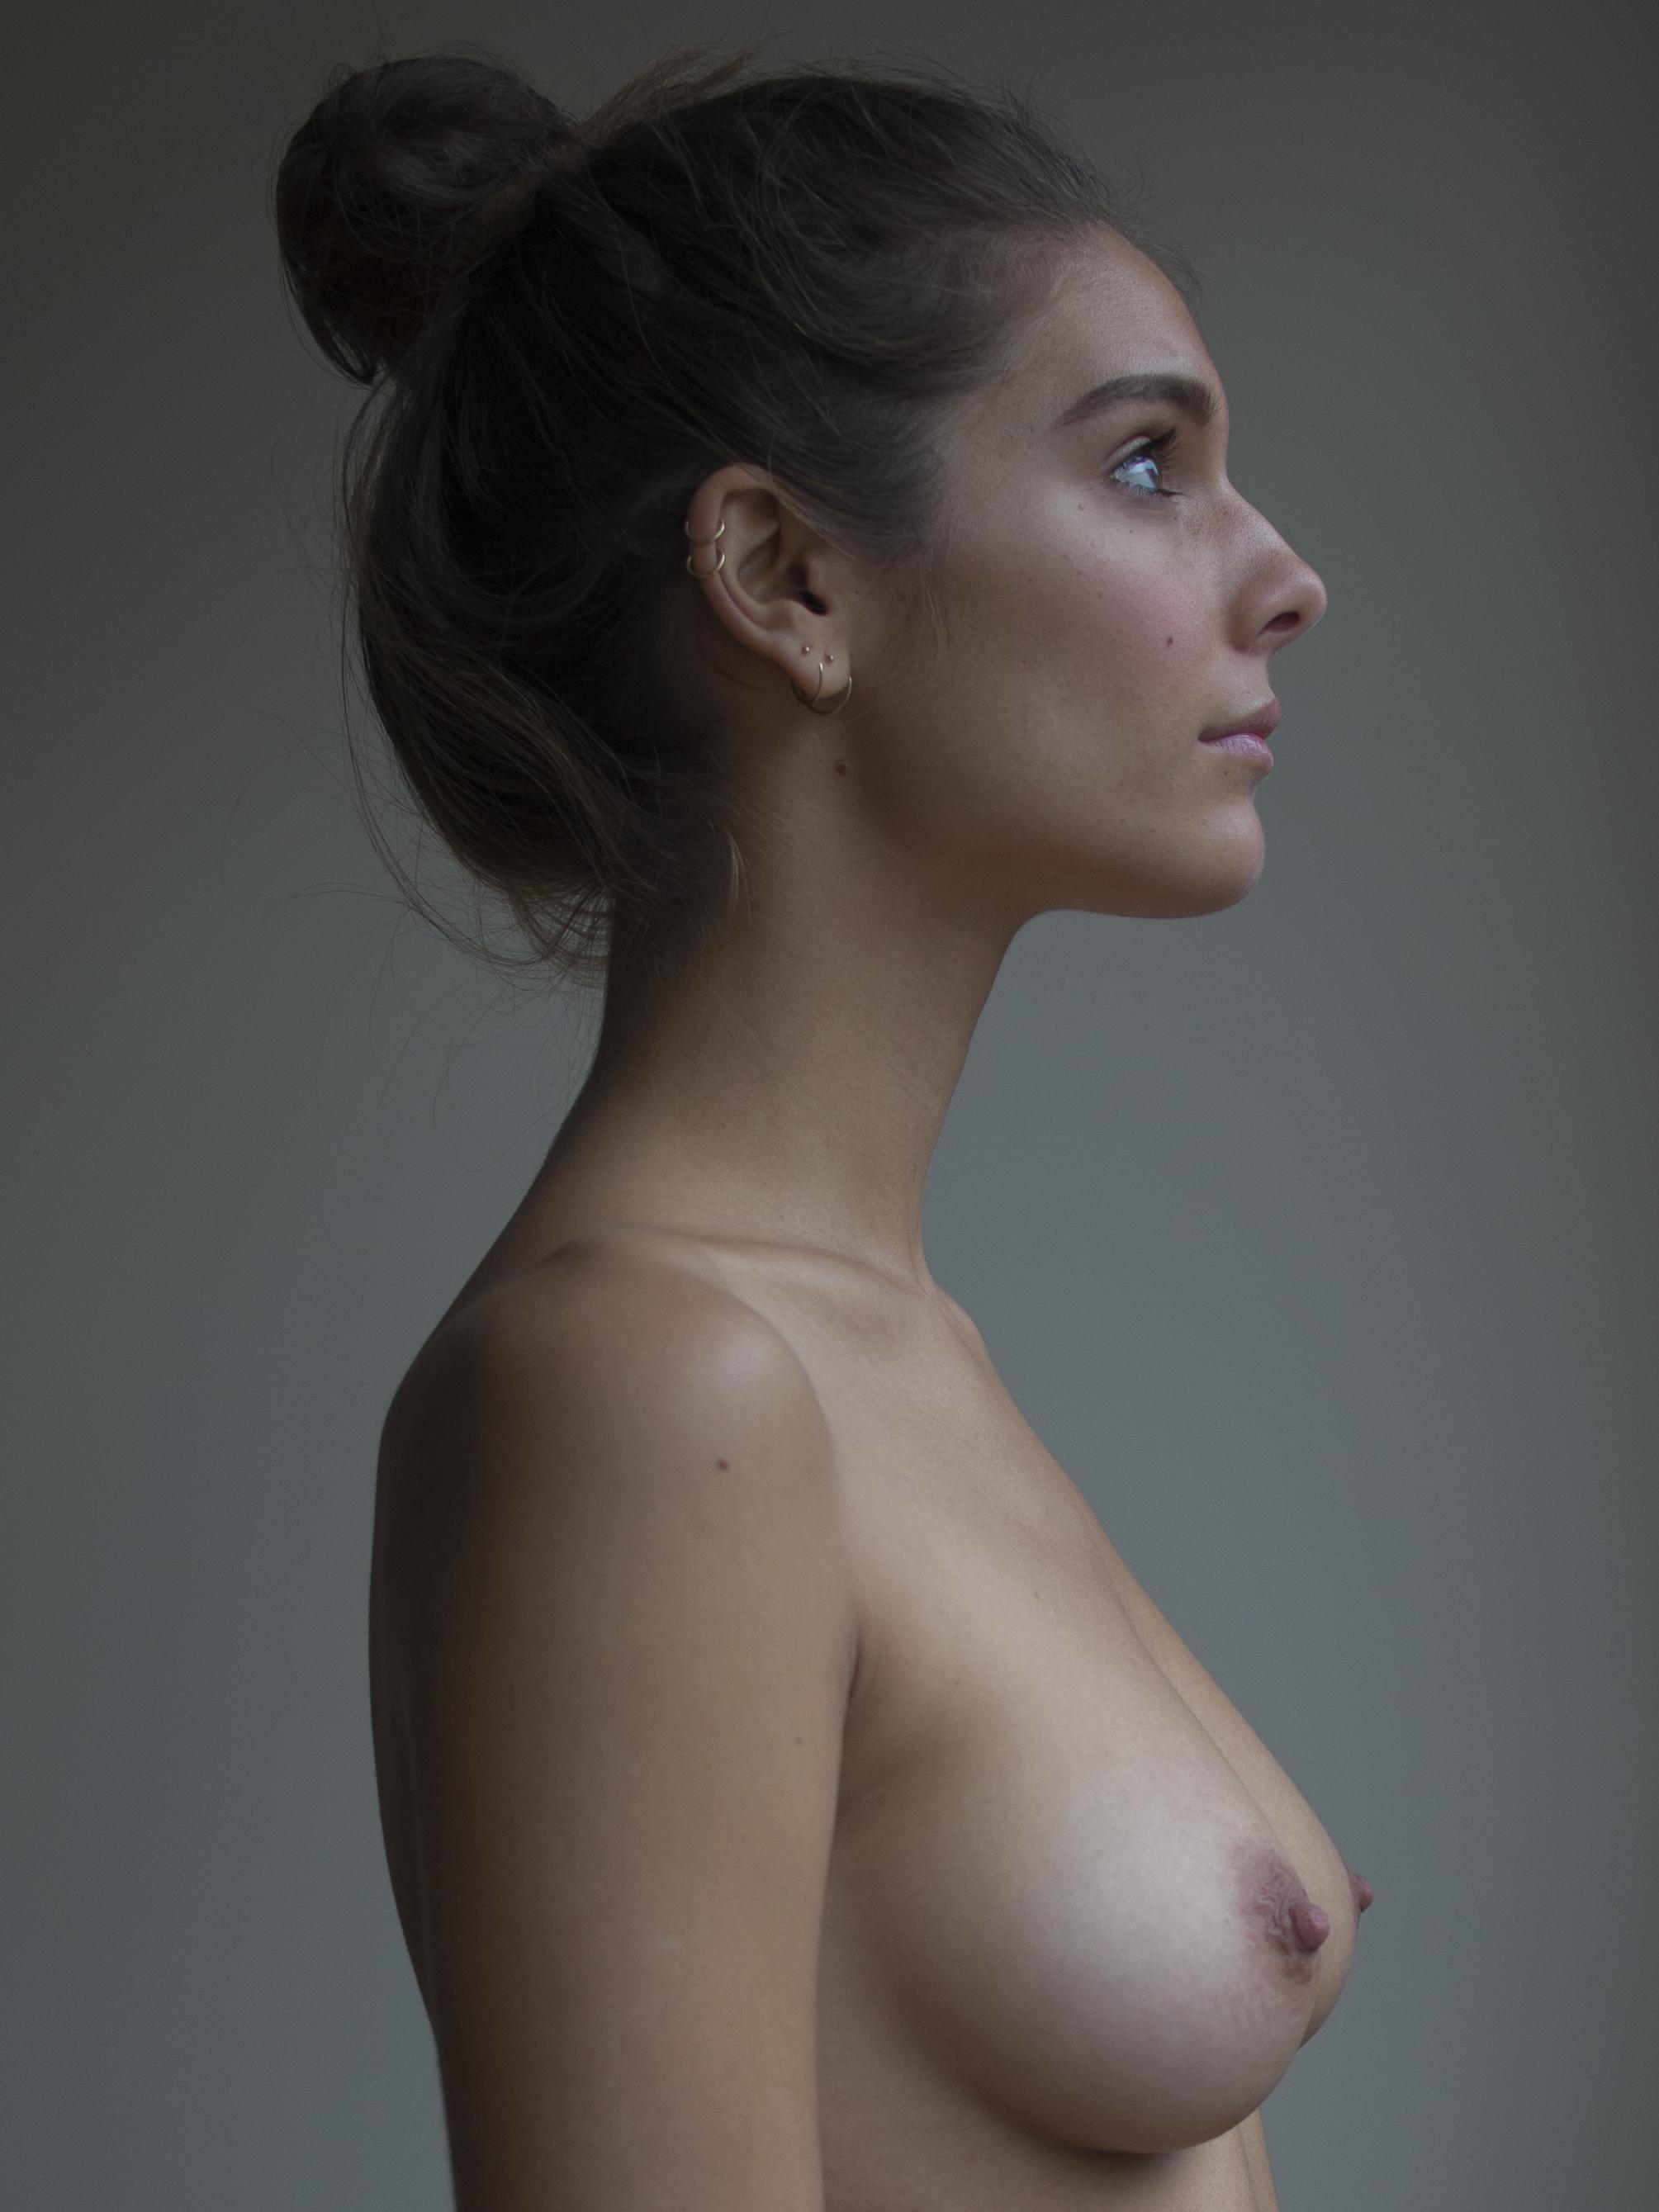 Naked Caitlin Stasey Added 07 19 2016 By Bot